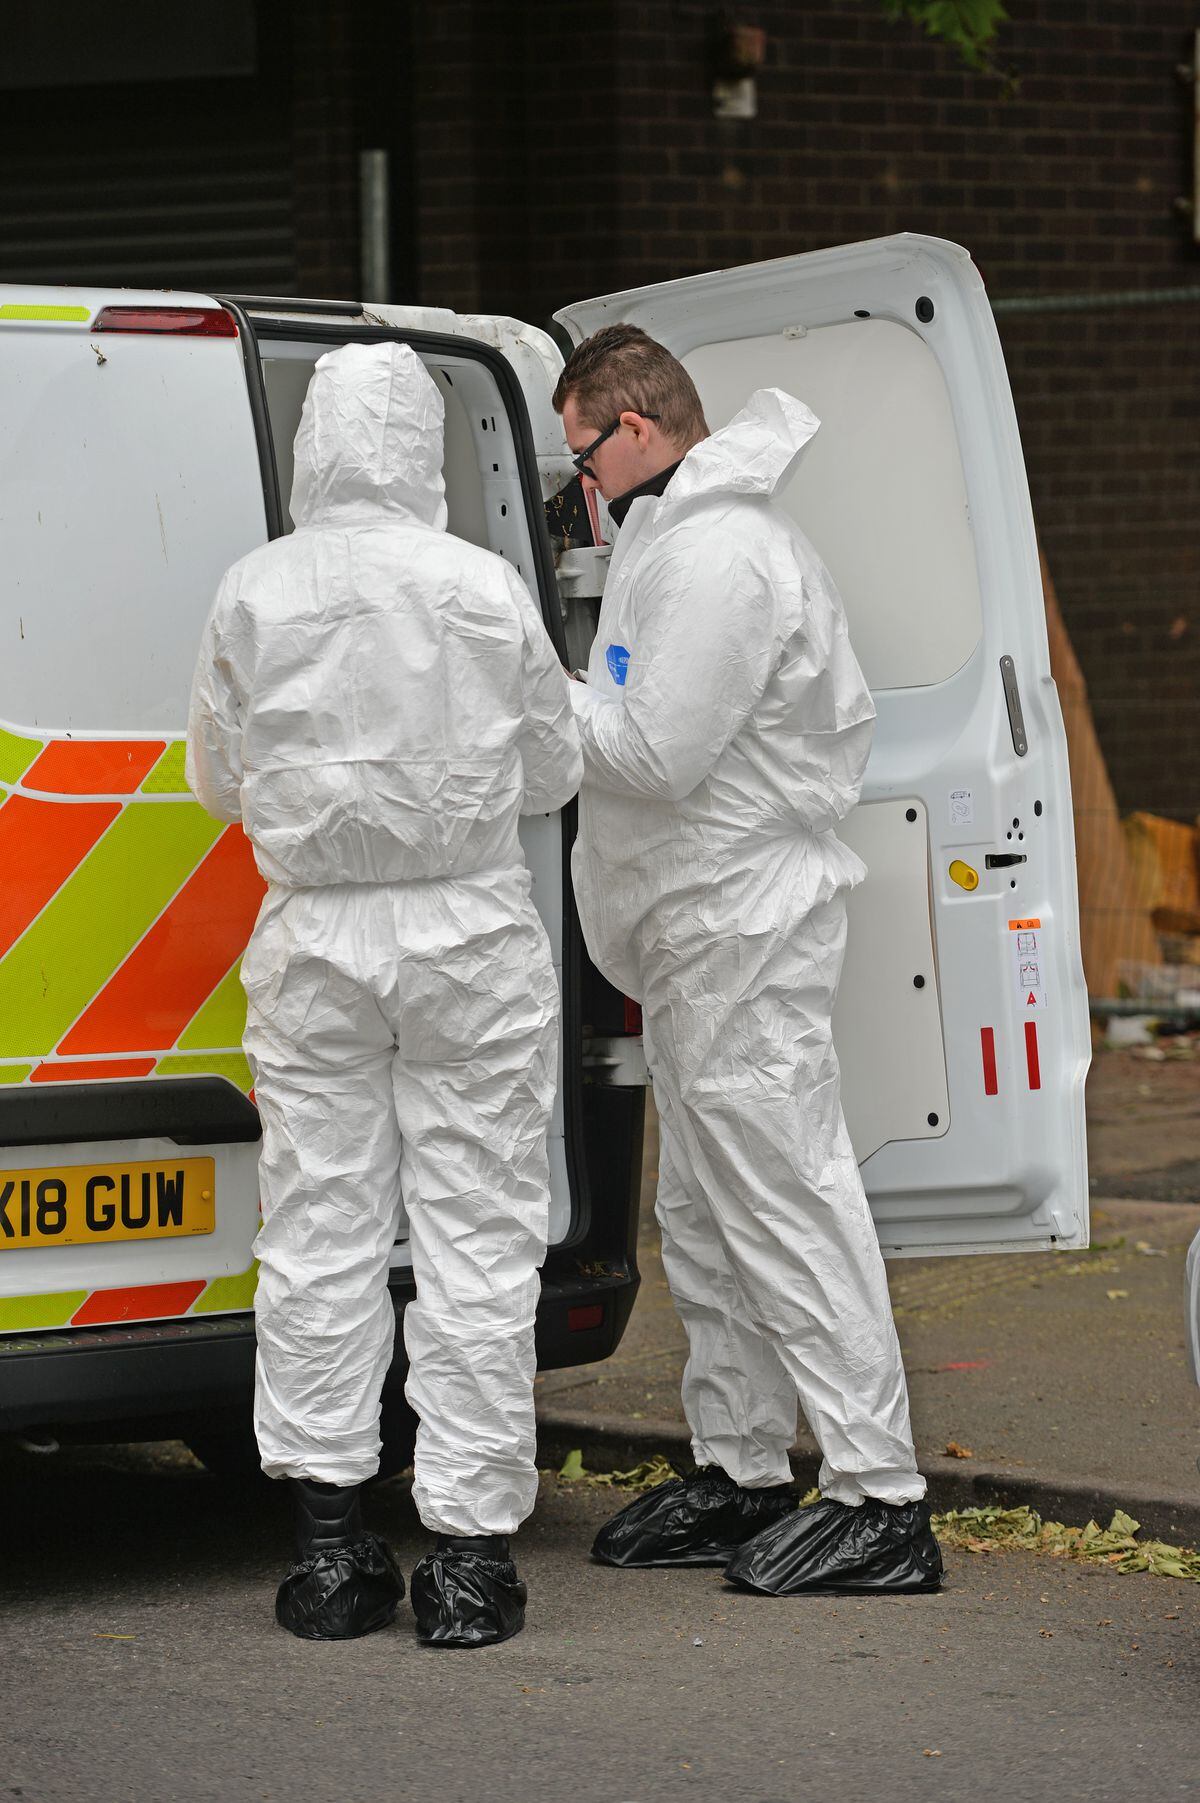 Forensic officers were at the scene